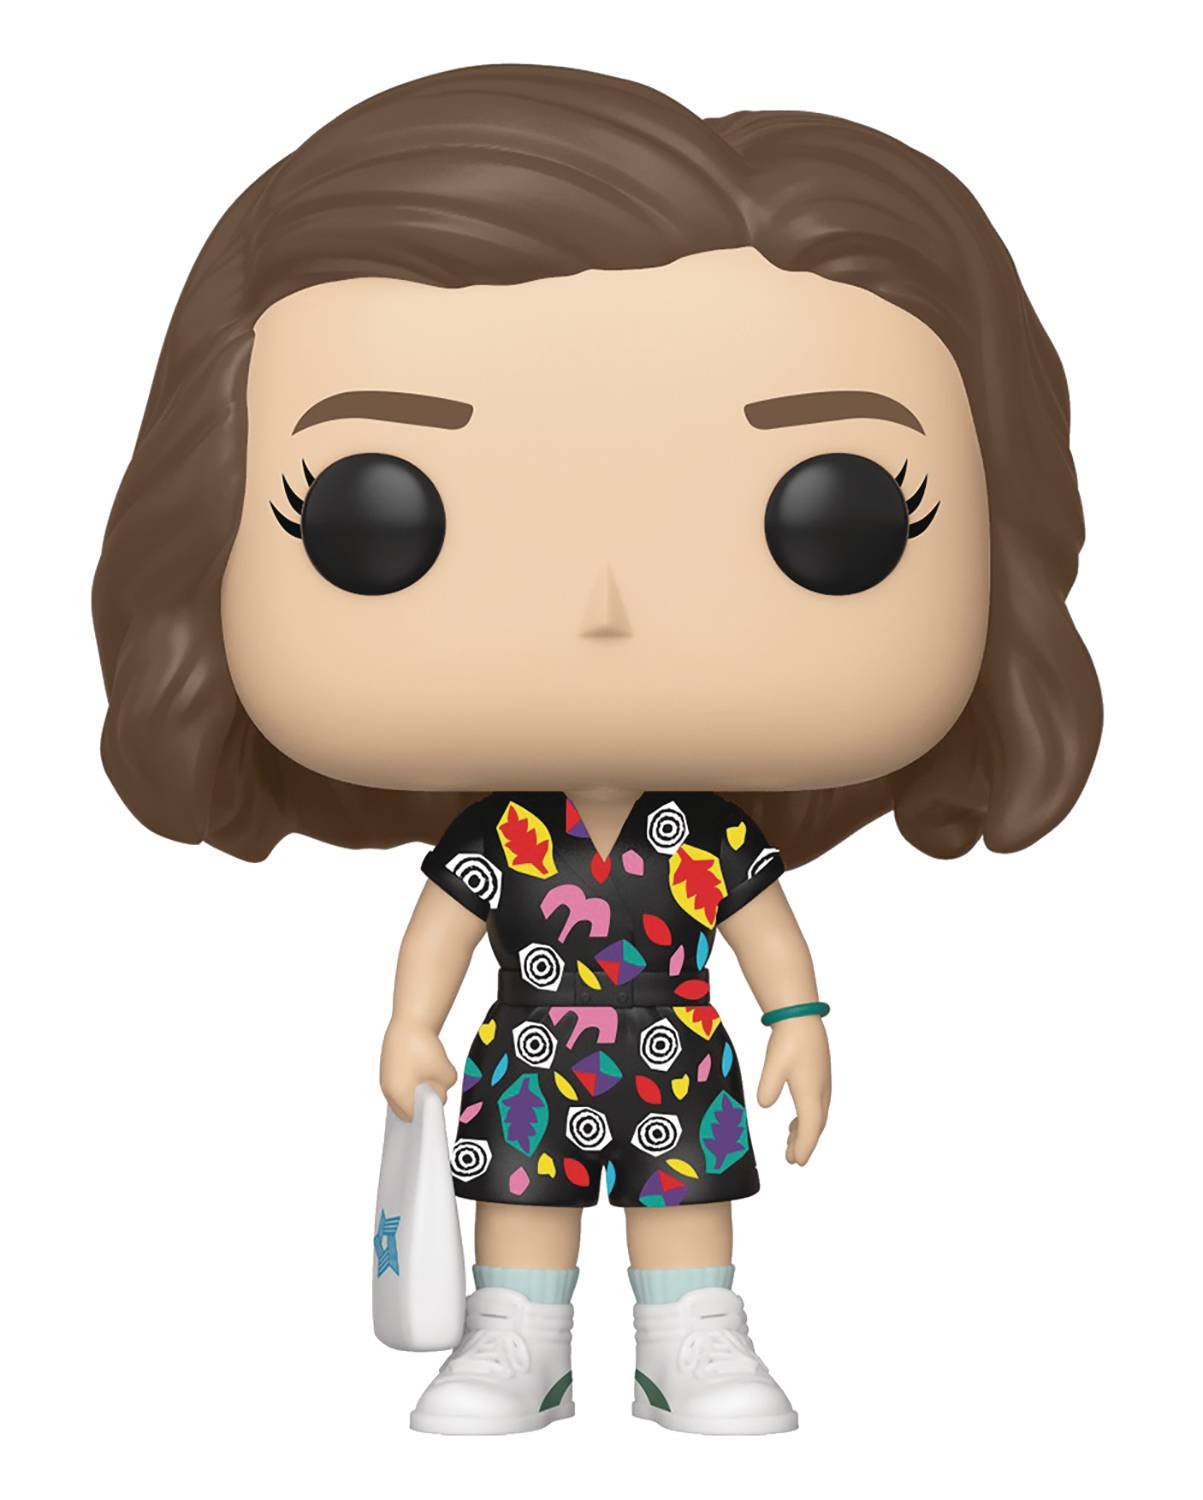 POP TV STRANGER THINGS ELEVEN IN MALL OUTFIT VINYL FIG